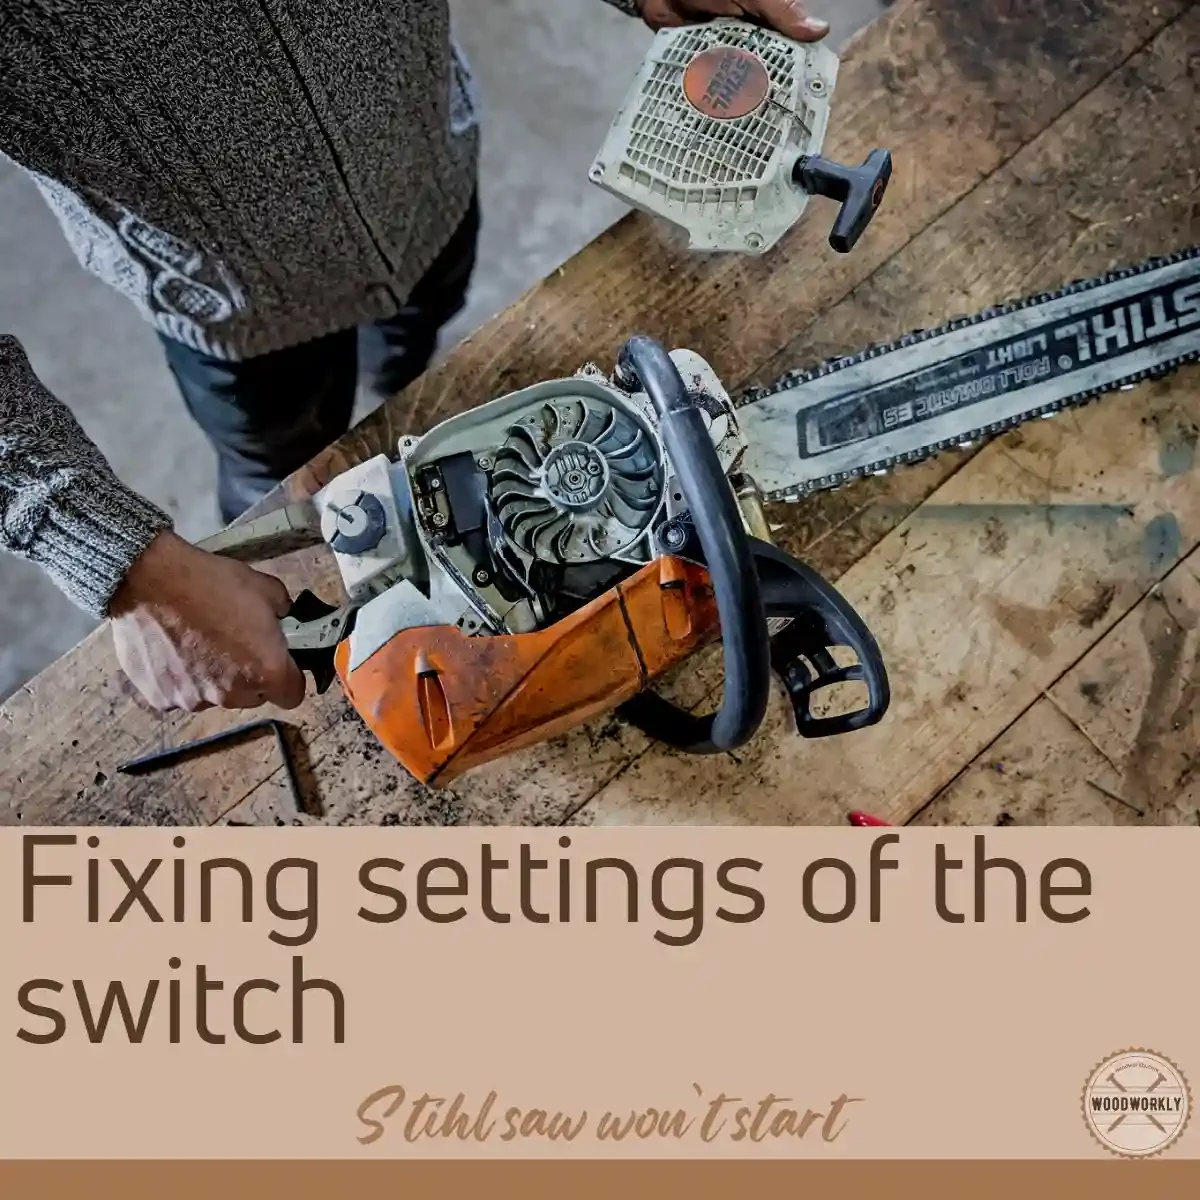 Fixing settings of the switch